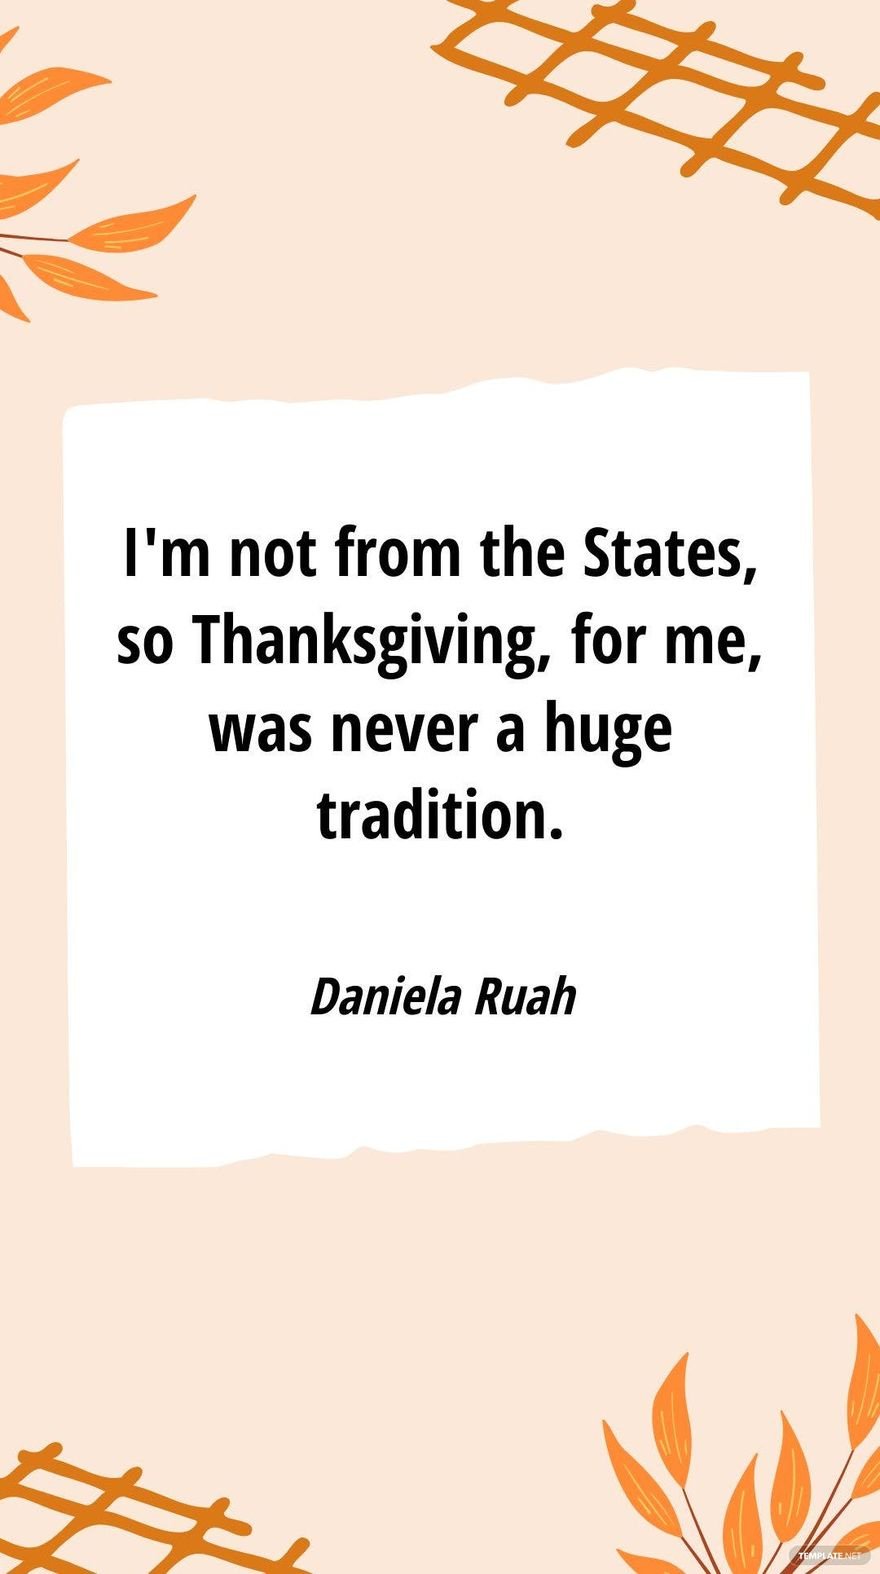 Free Daniela Ruah - I'm not from the States, so Thanksgiving, for me, was never a huge tradition. in JPG